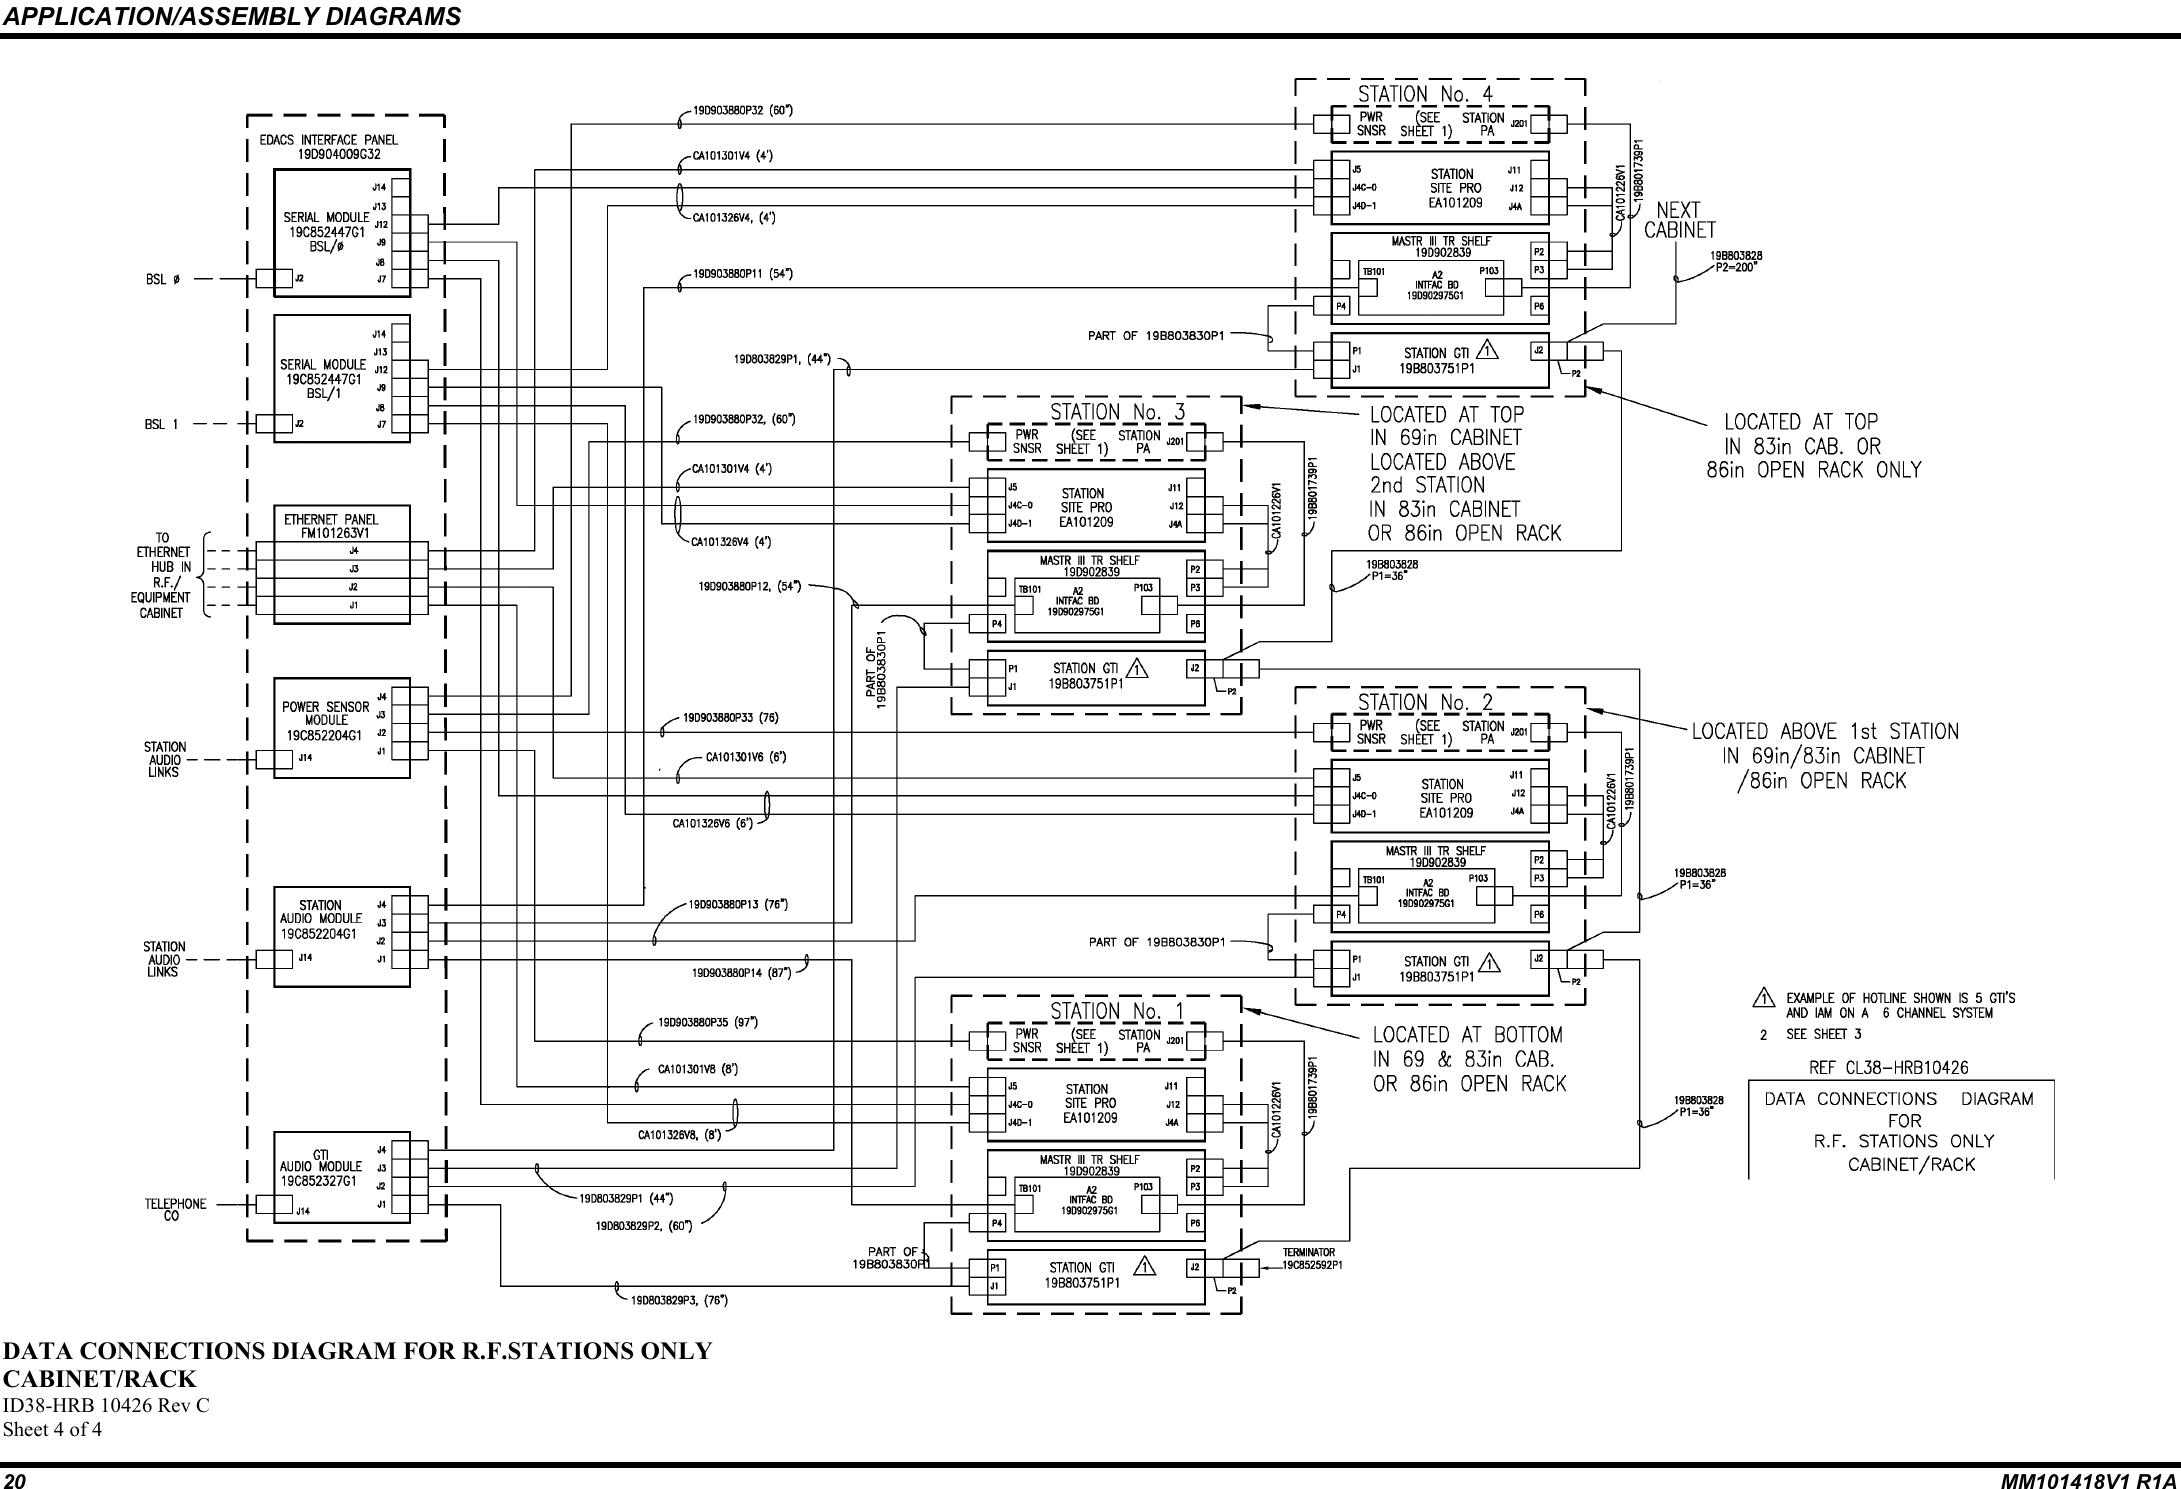 APPLICATION/ASSEMBLY DIAGRAMS20 MM101418V1 R1ADATA CONNECTIONS DIAGRAM FOR R.F.STATIONS ONLYCABINET/RACKID38-HRB 10426 Rev CSheet 4 of 4